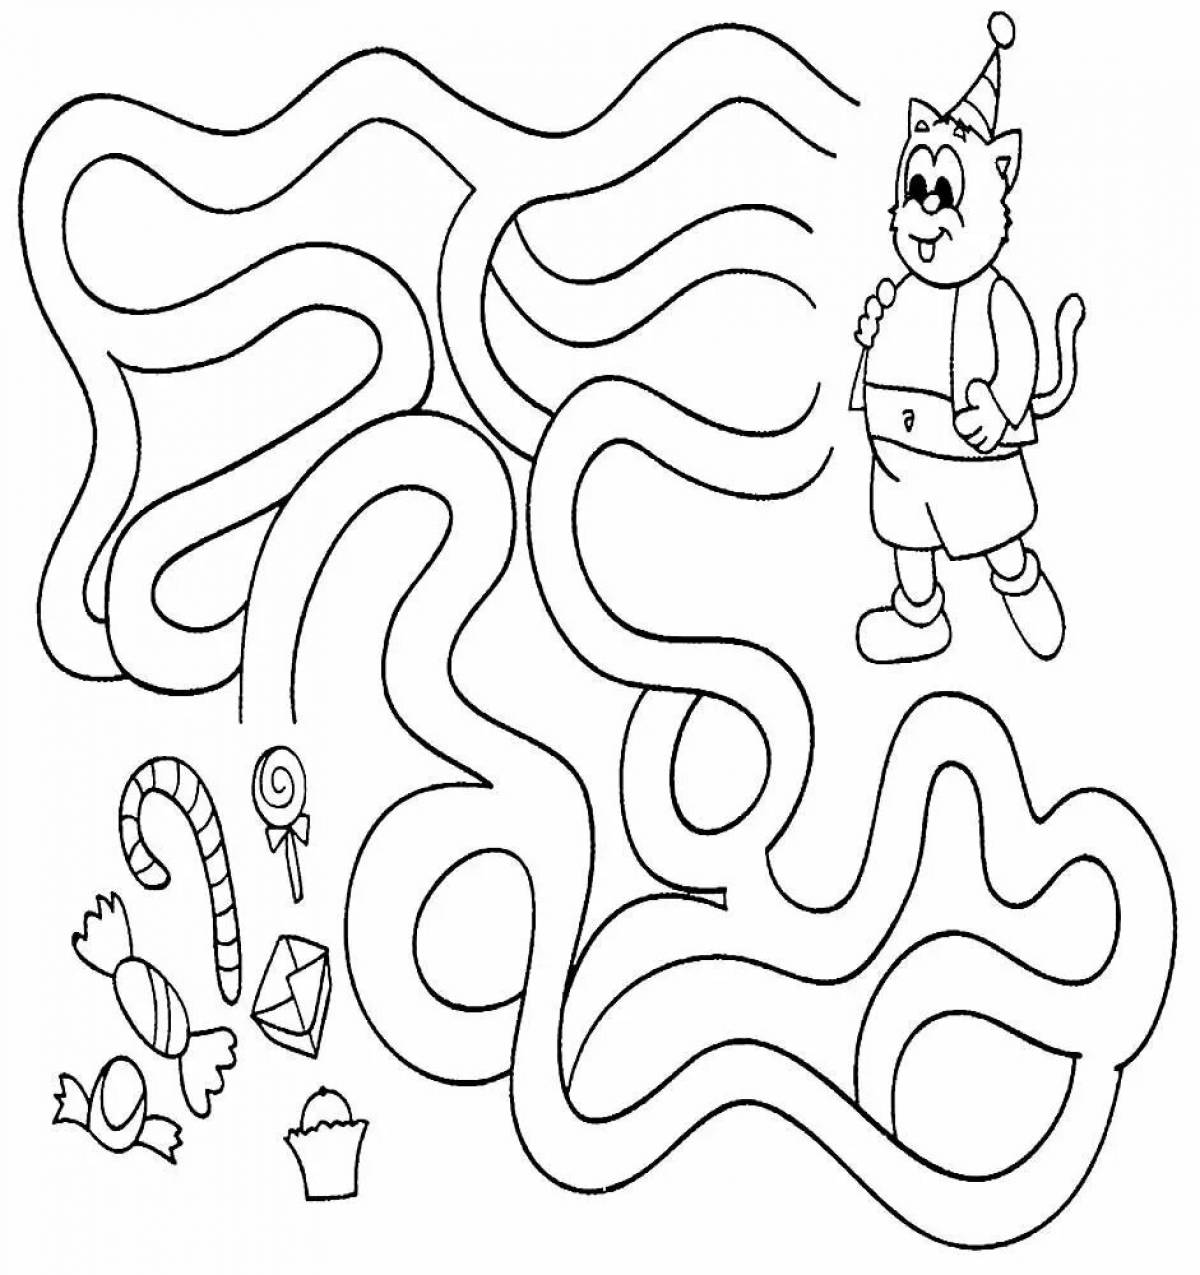 Maze for children 3 4 years old #11